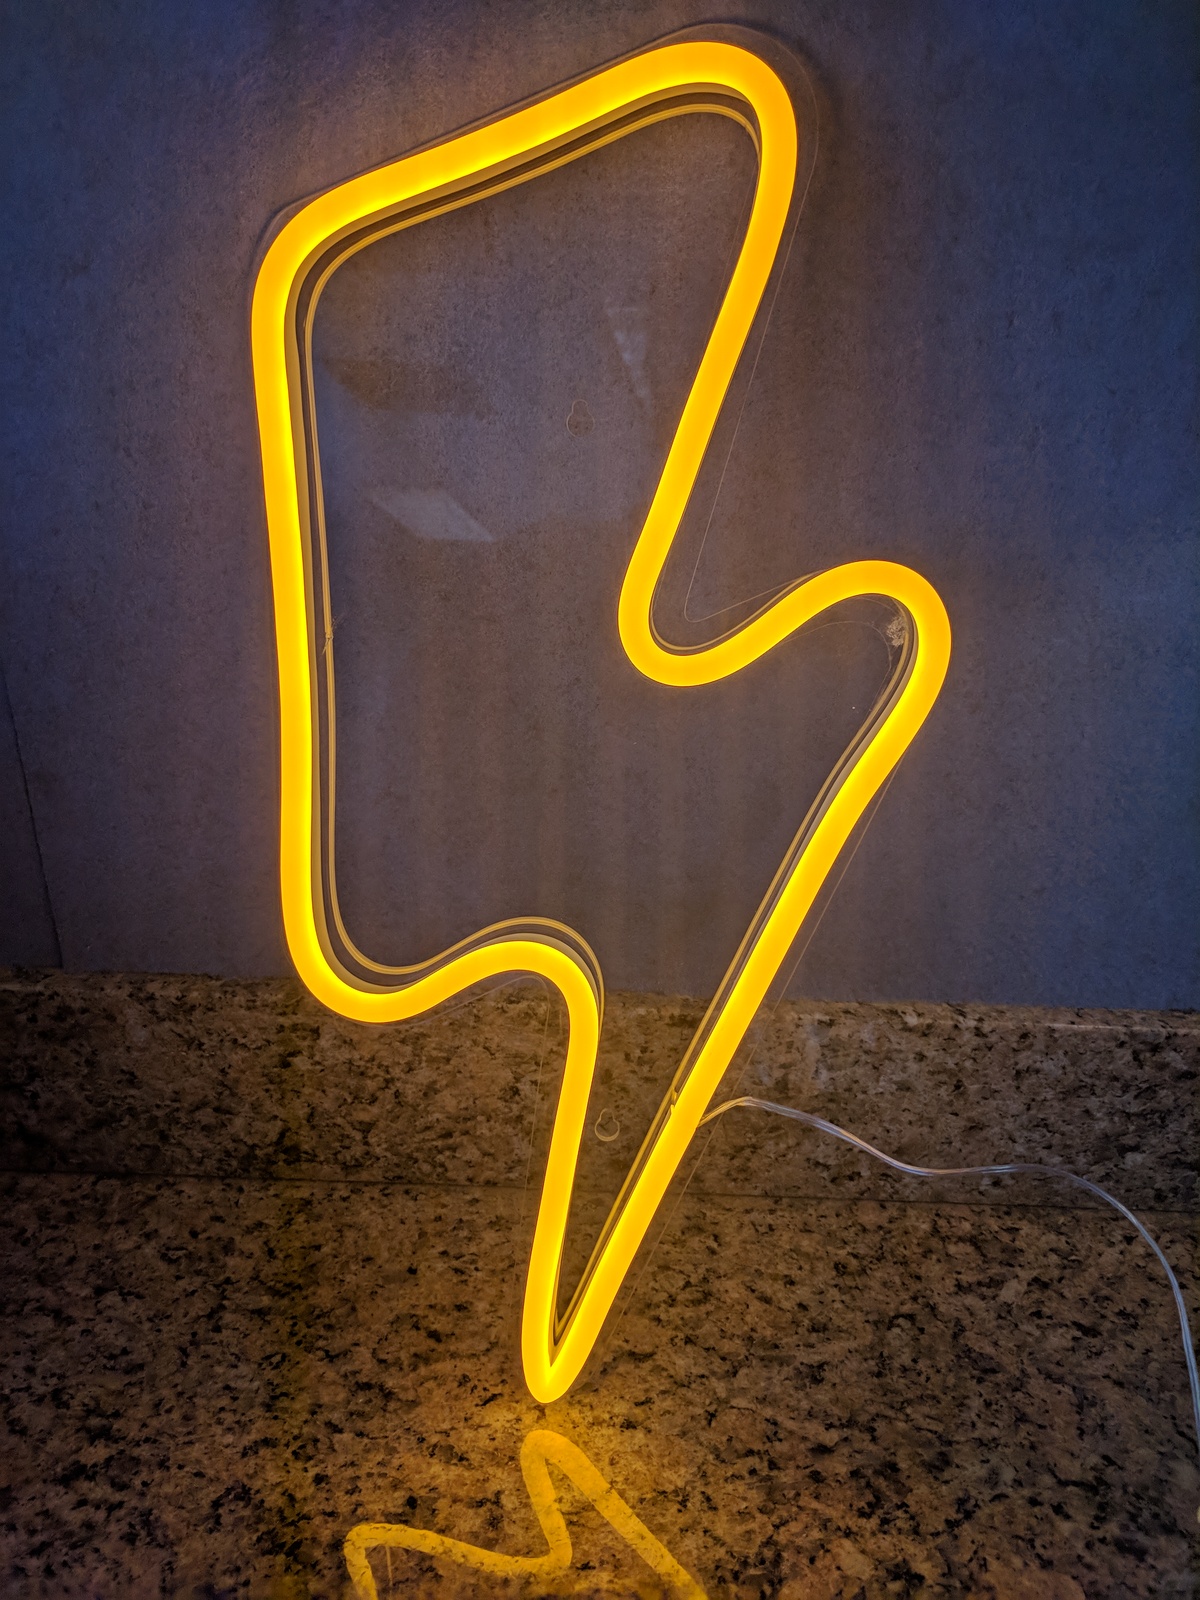 Neon has gotten way better.  LED and bendable plastic!!